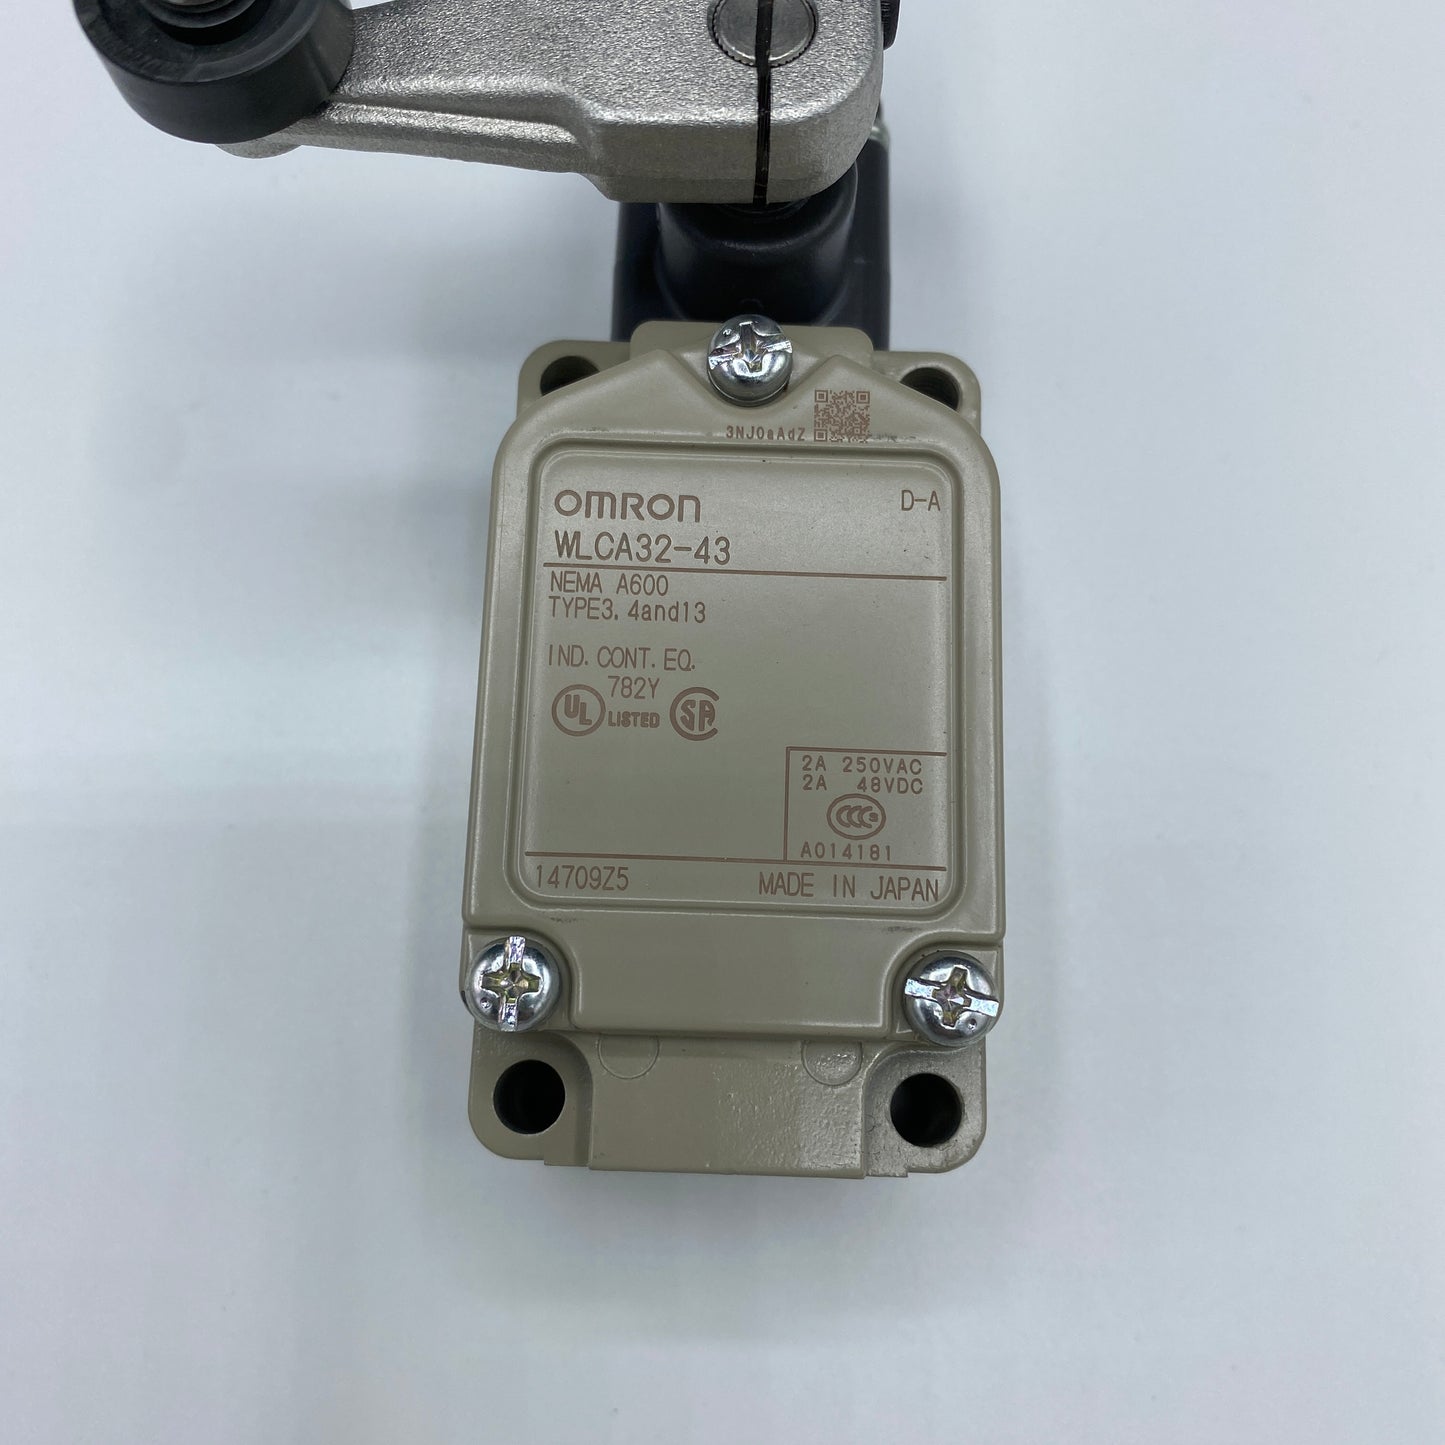 OMRON WLCA32-43 Two-circuit limit switch